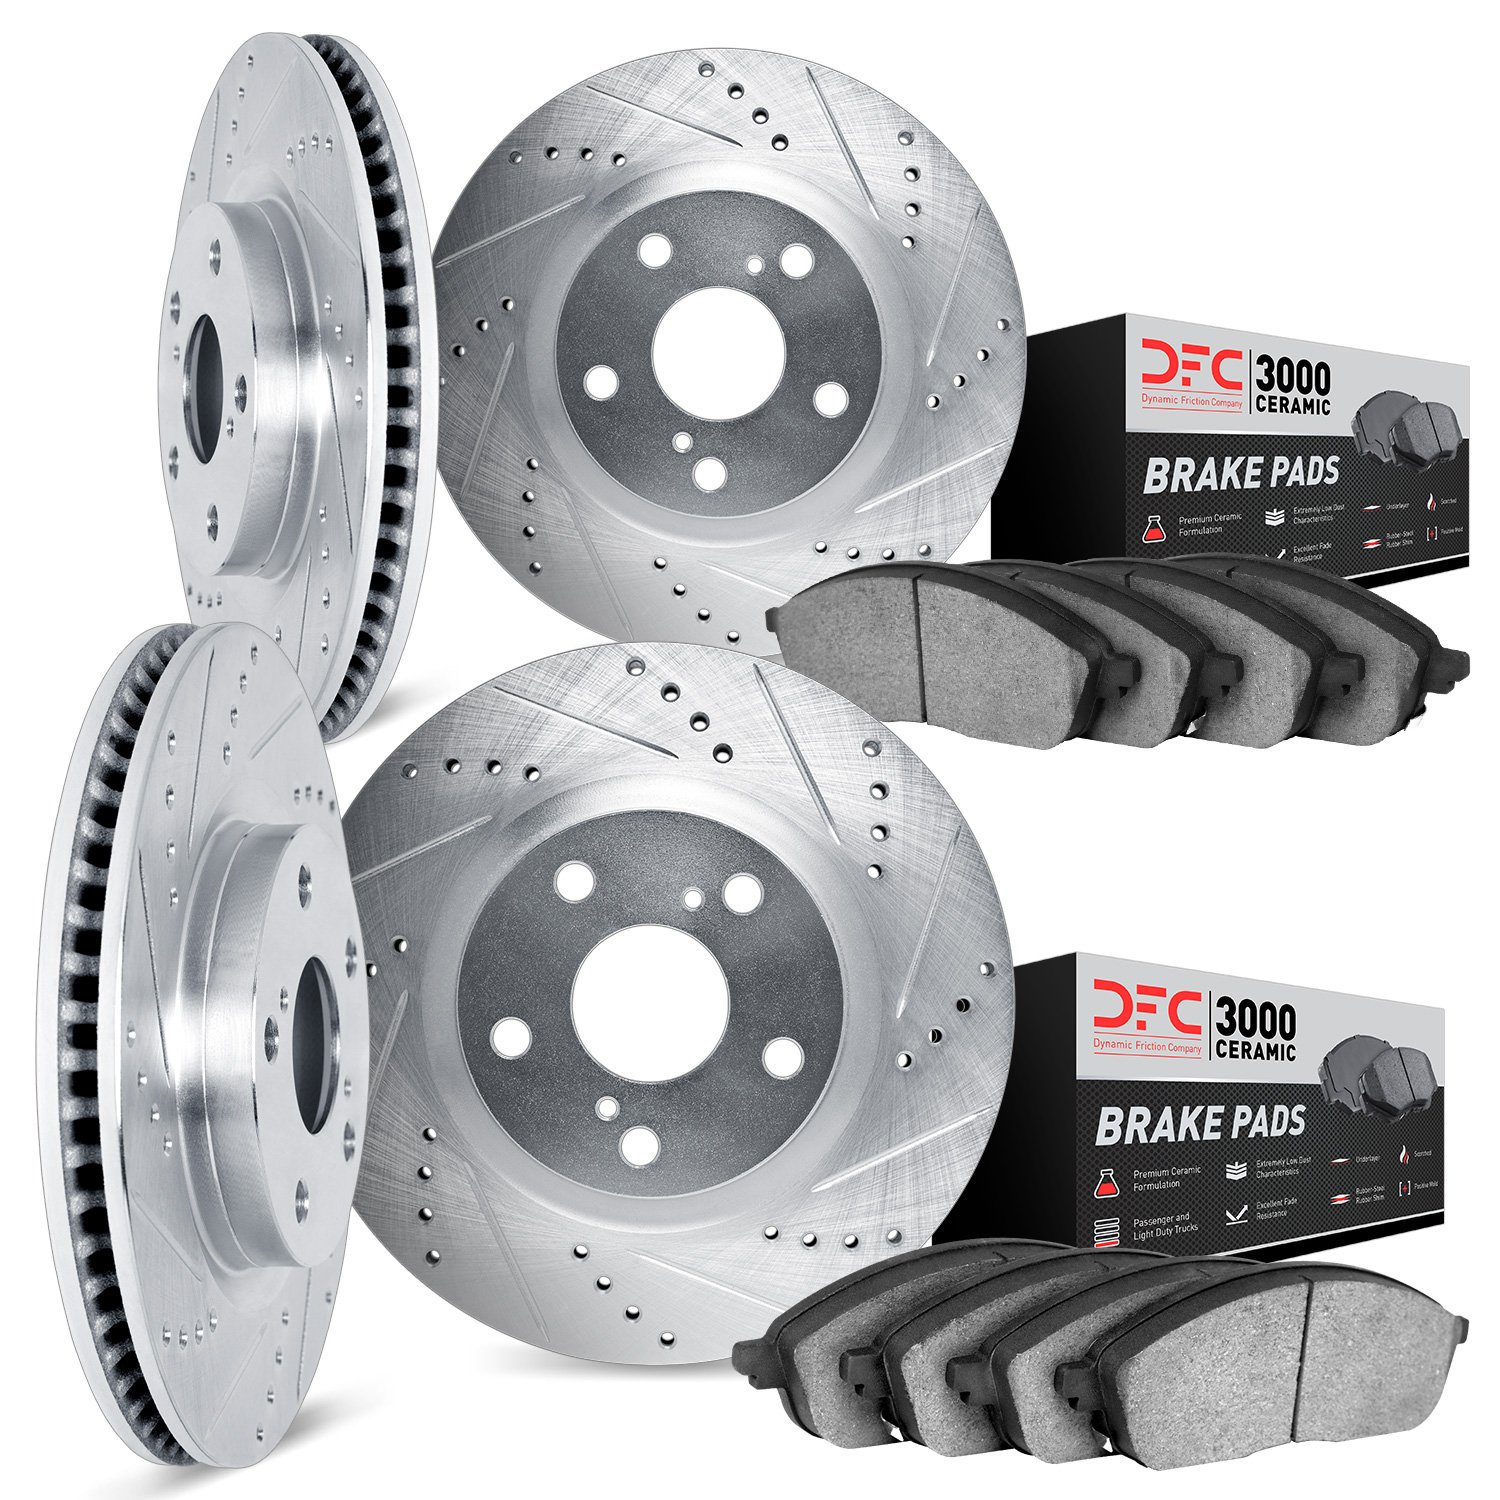 7304-31050 Drilled/Slotted Brake Rotor with 3000-Series Ceramic Brake Pads Kit [Silver], 2006-2010 BMW, Position: Front and Rear